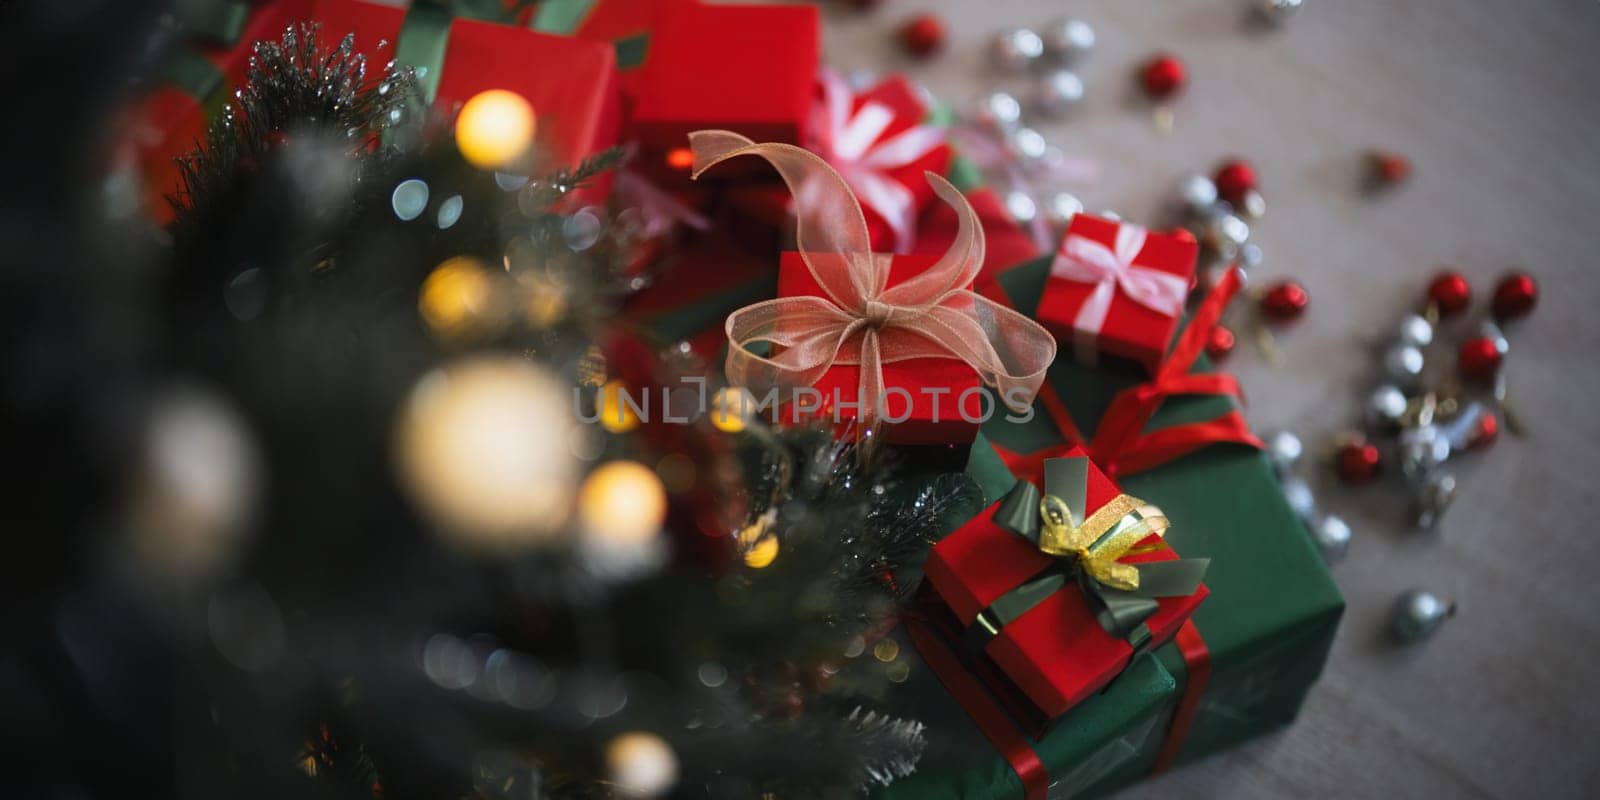 Background Christmas Tree and gift box with Decorations Near a Fireplace with Lights.